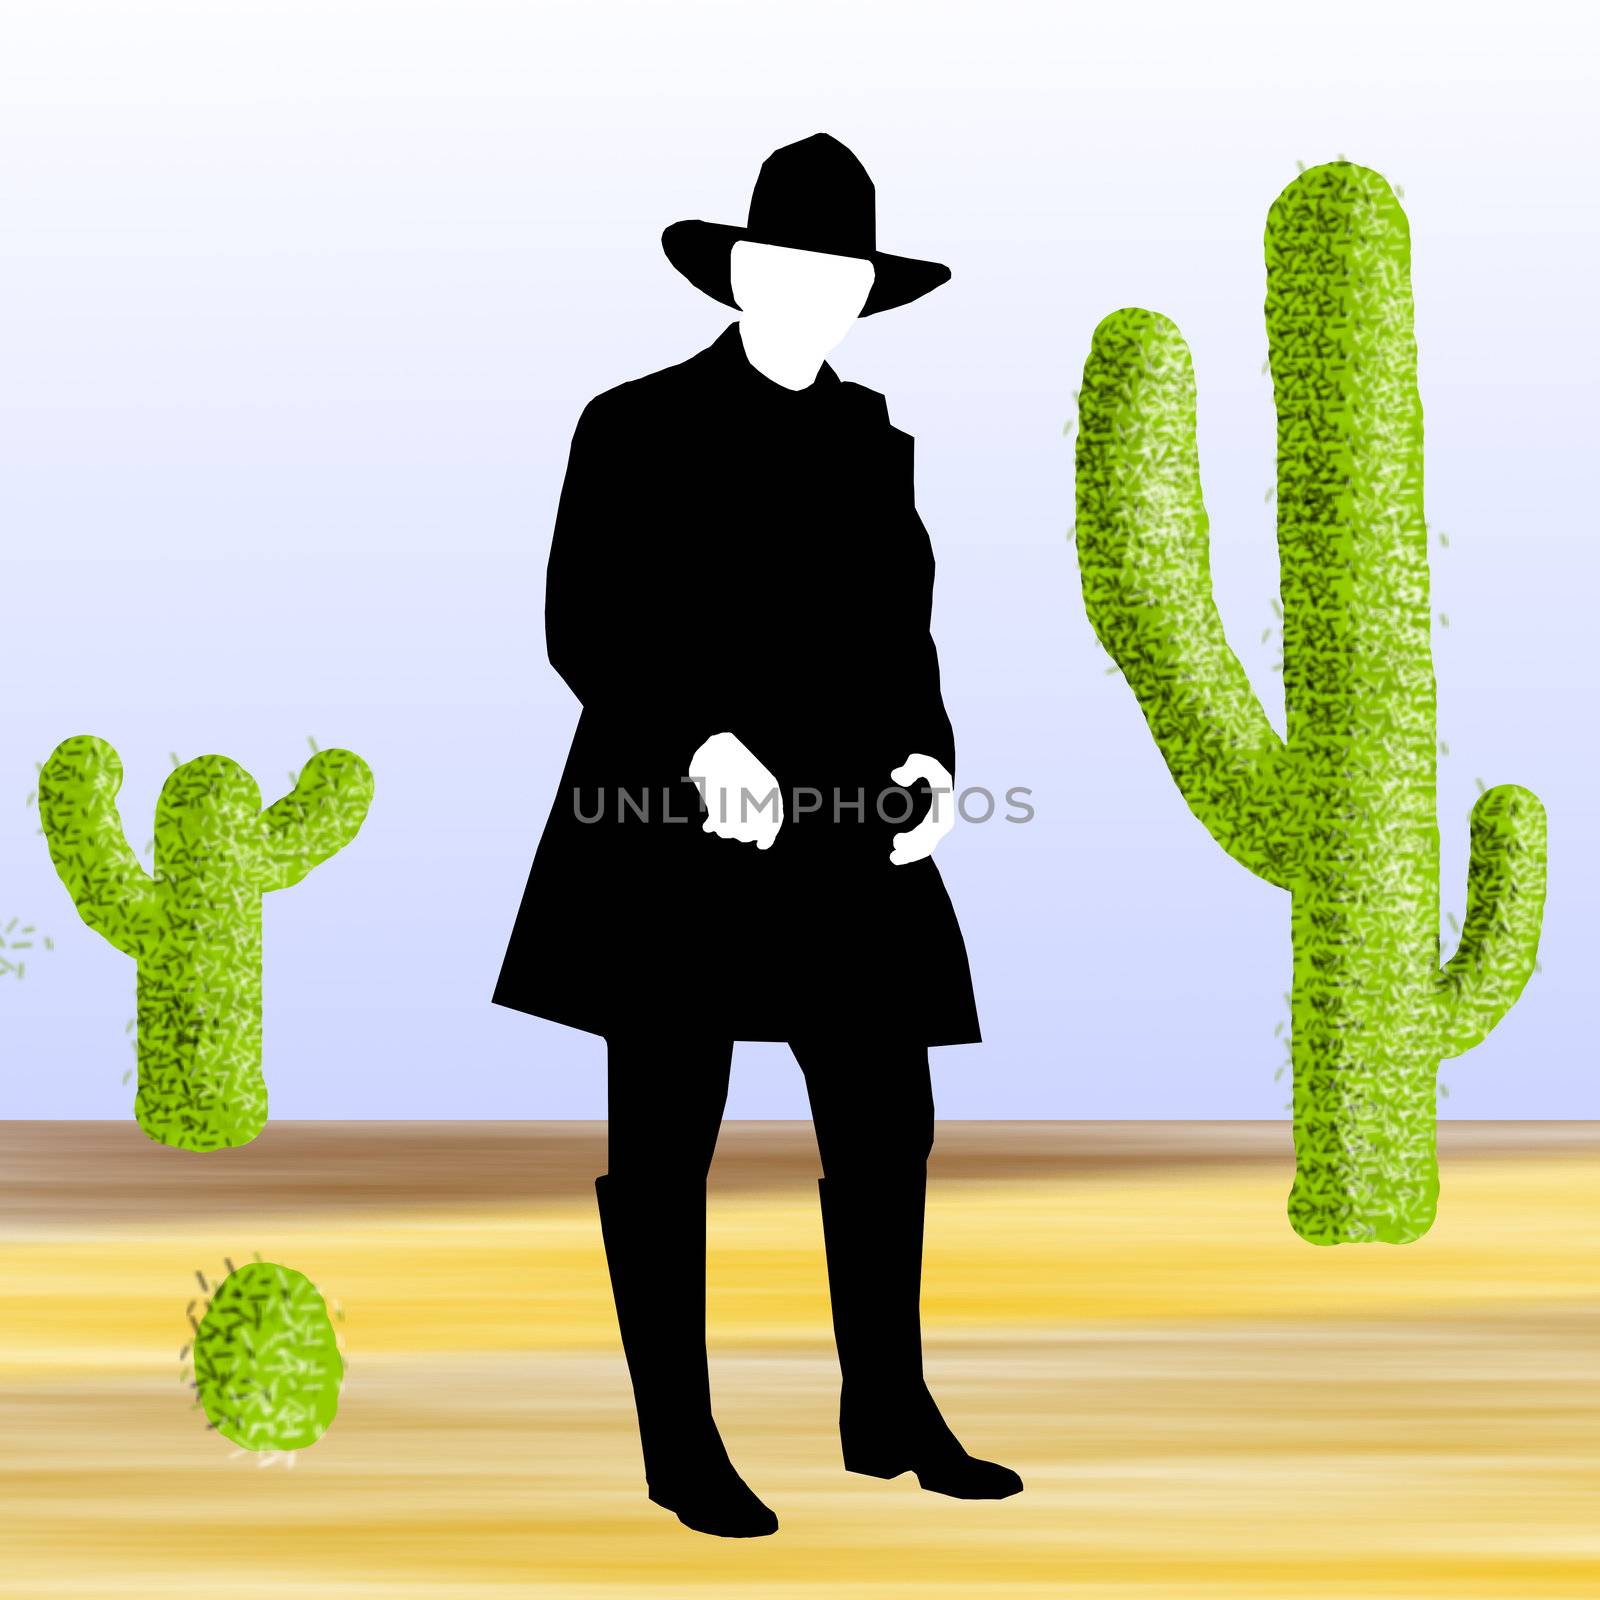 A cowboy dressed in black in the desert surrounded with cacti.